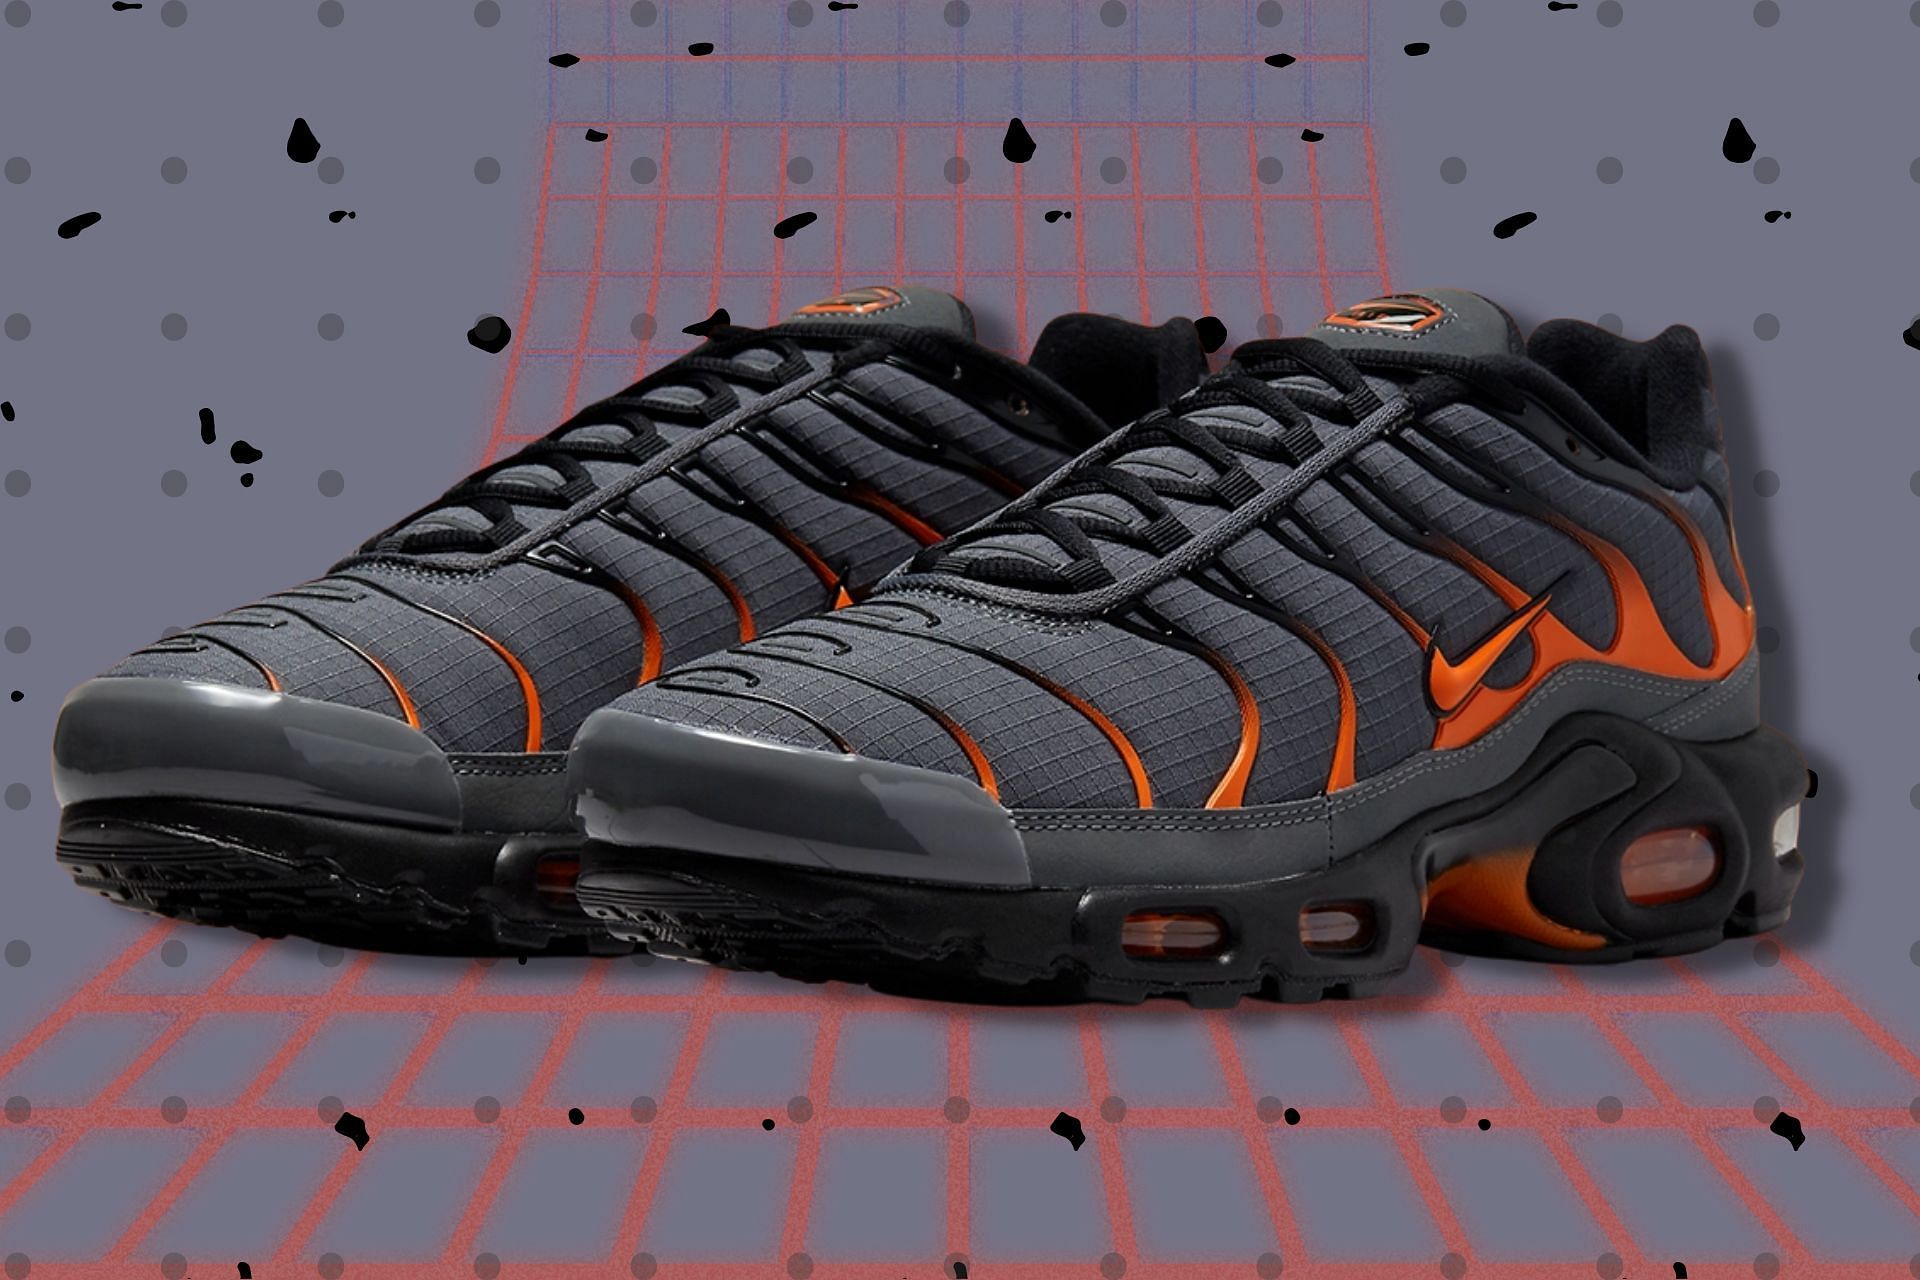 promotion equal Masculinity Where to buy Nike Air Max Plus Orange Grey shoes? Price and more details  explored